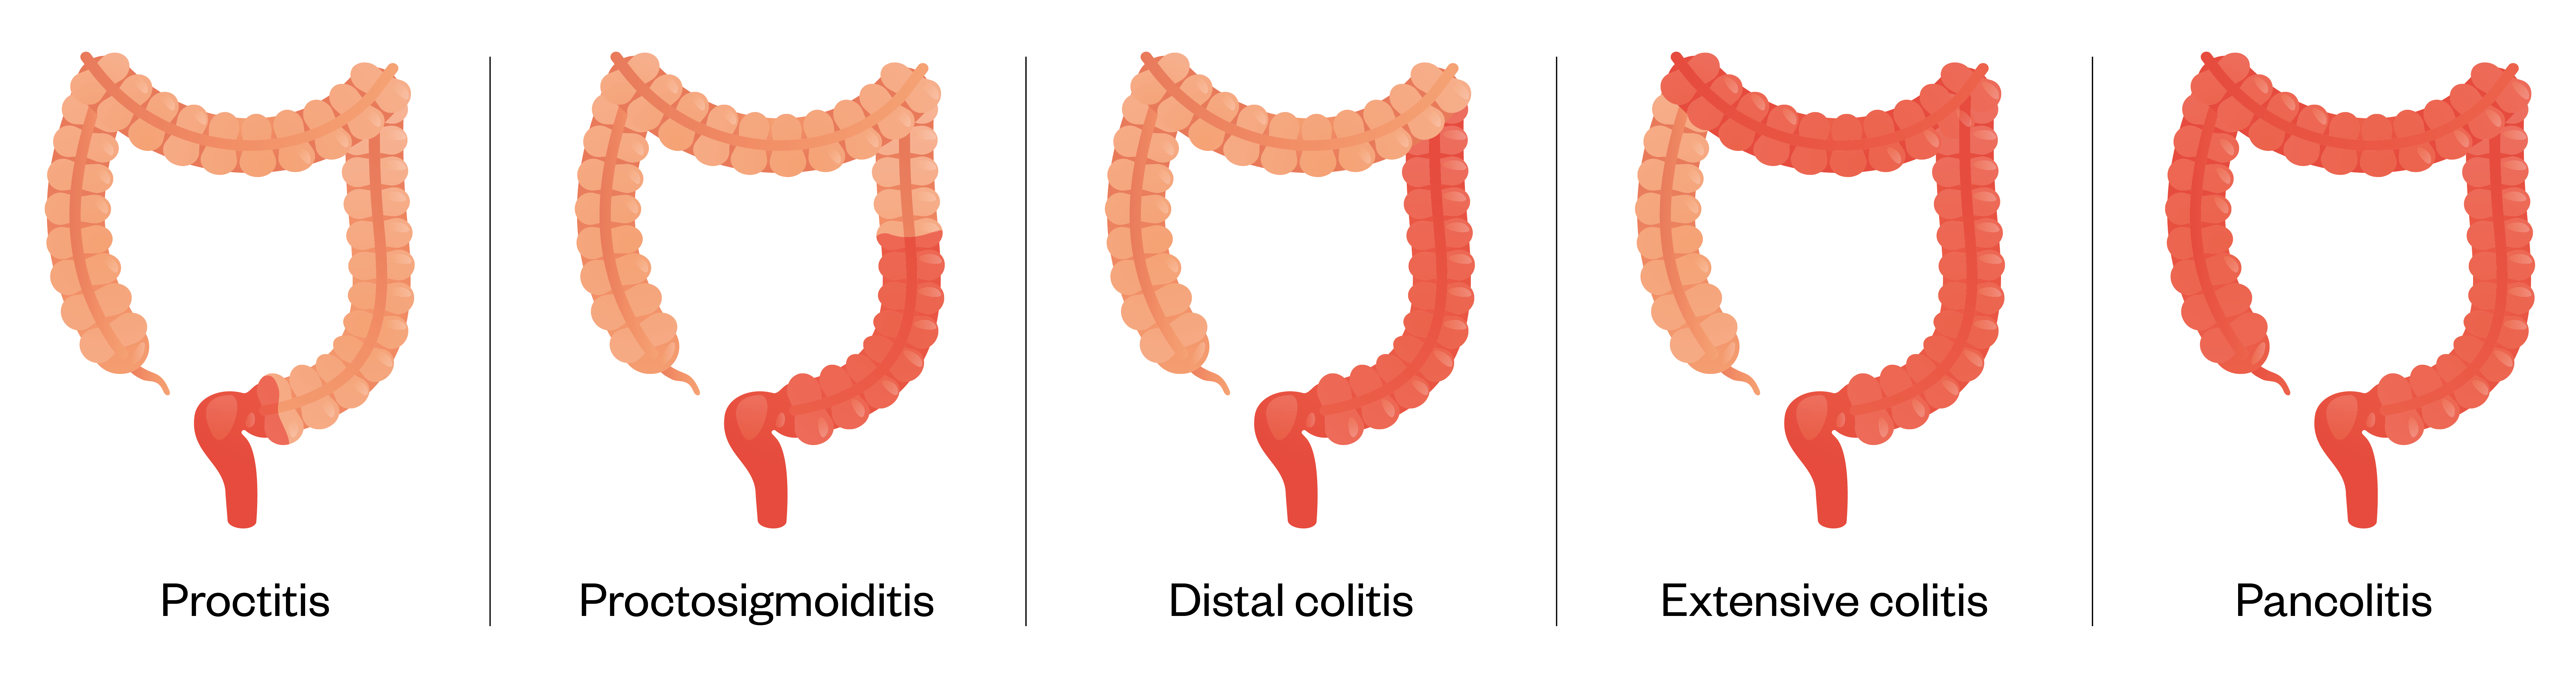 Figure 2: Degree of inflammation in ulcerative colitis Source: Shutterstock.com